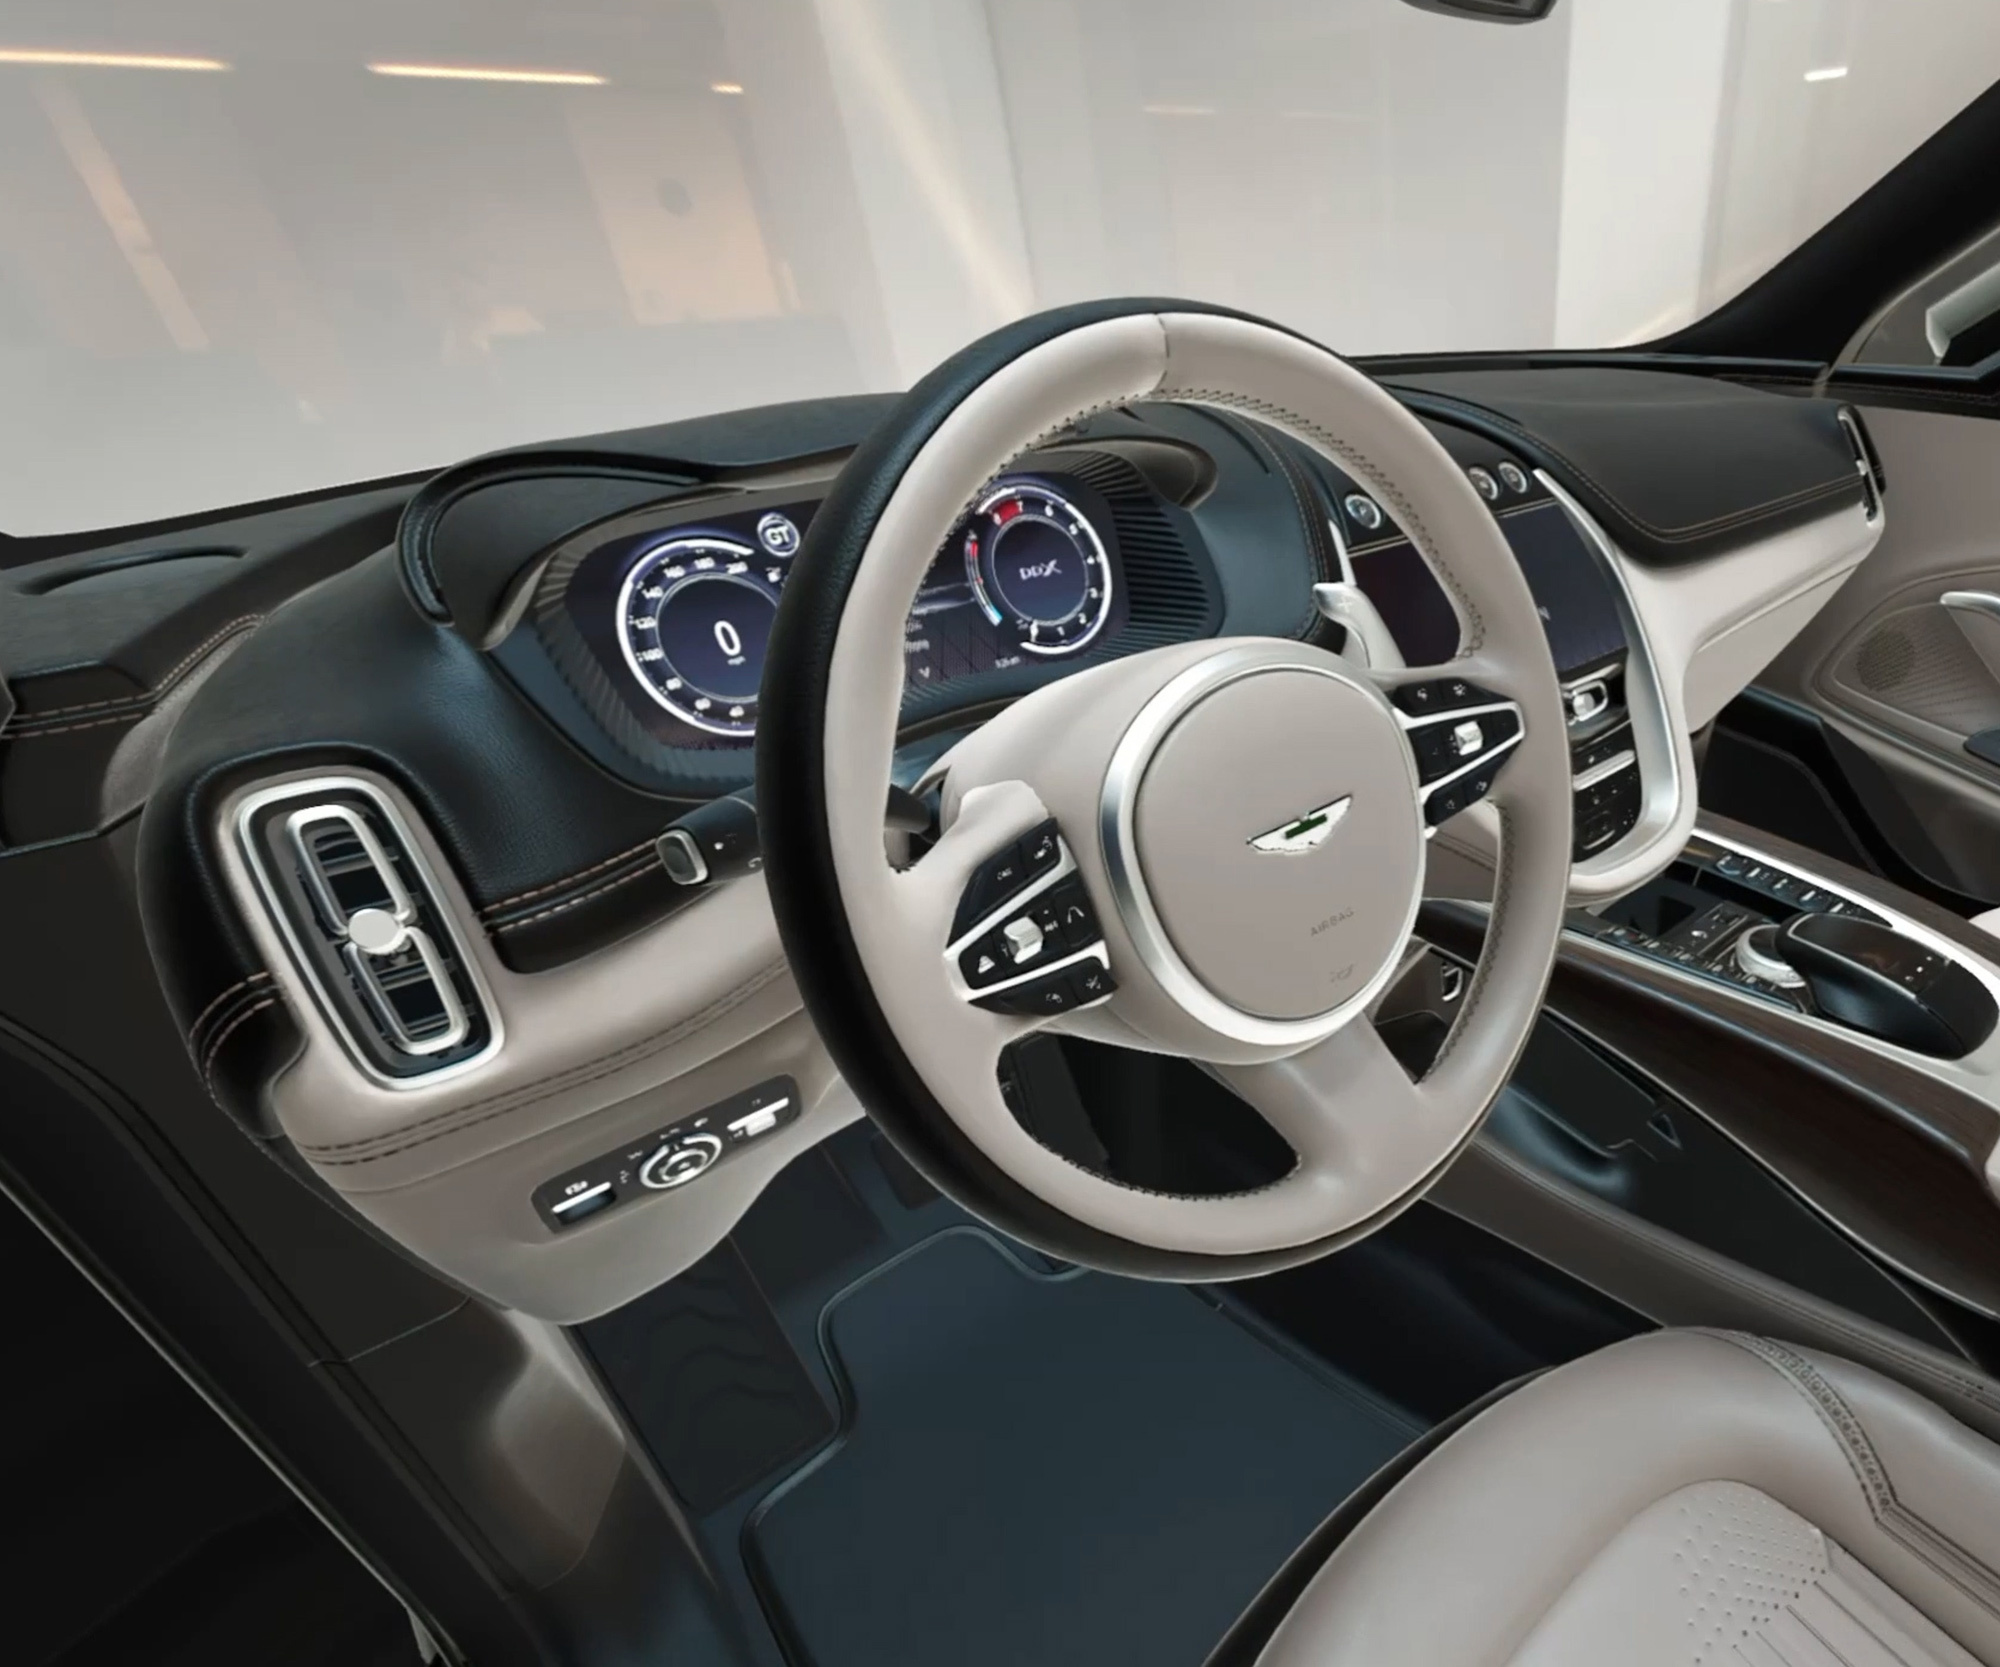 Aston Martin Uses Immersive Technology by Lenovo and Varjo. The 3D model of the Aston Martin DBX is made with Unity.